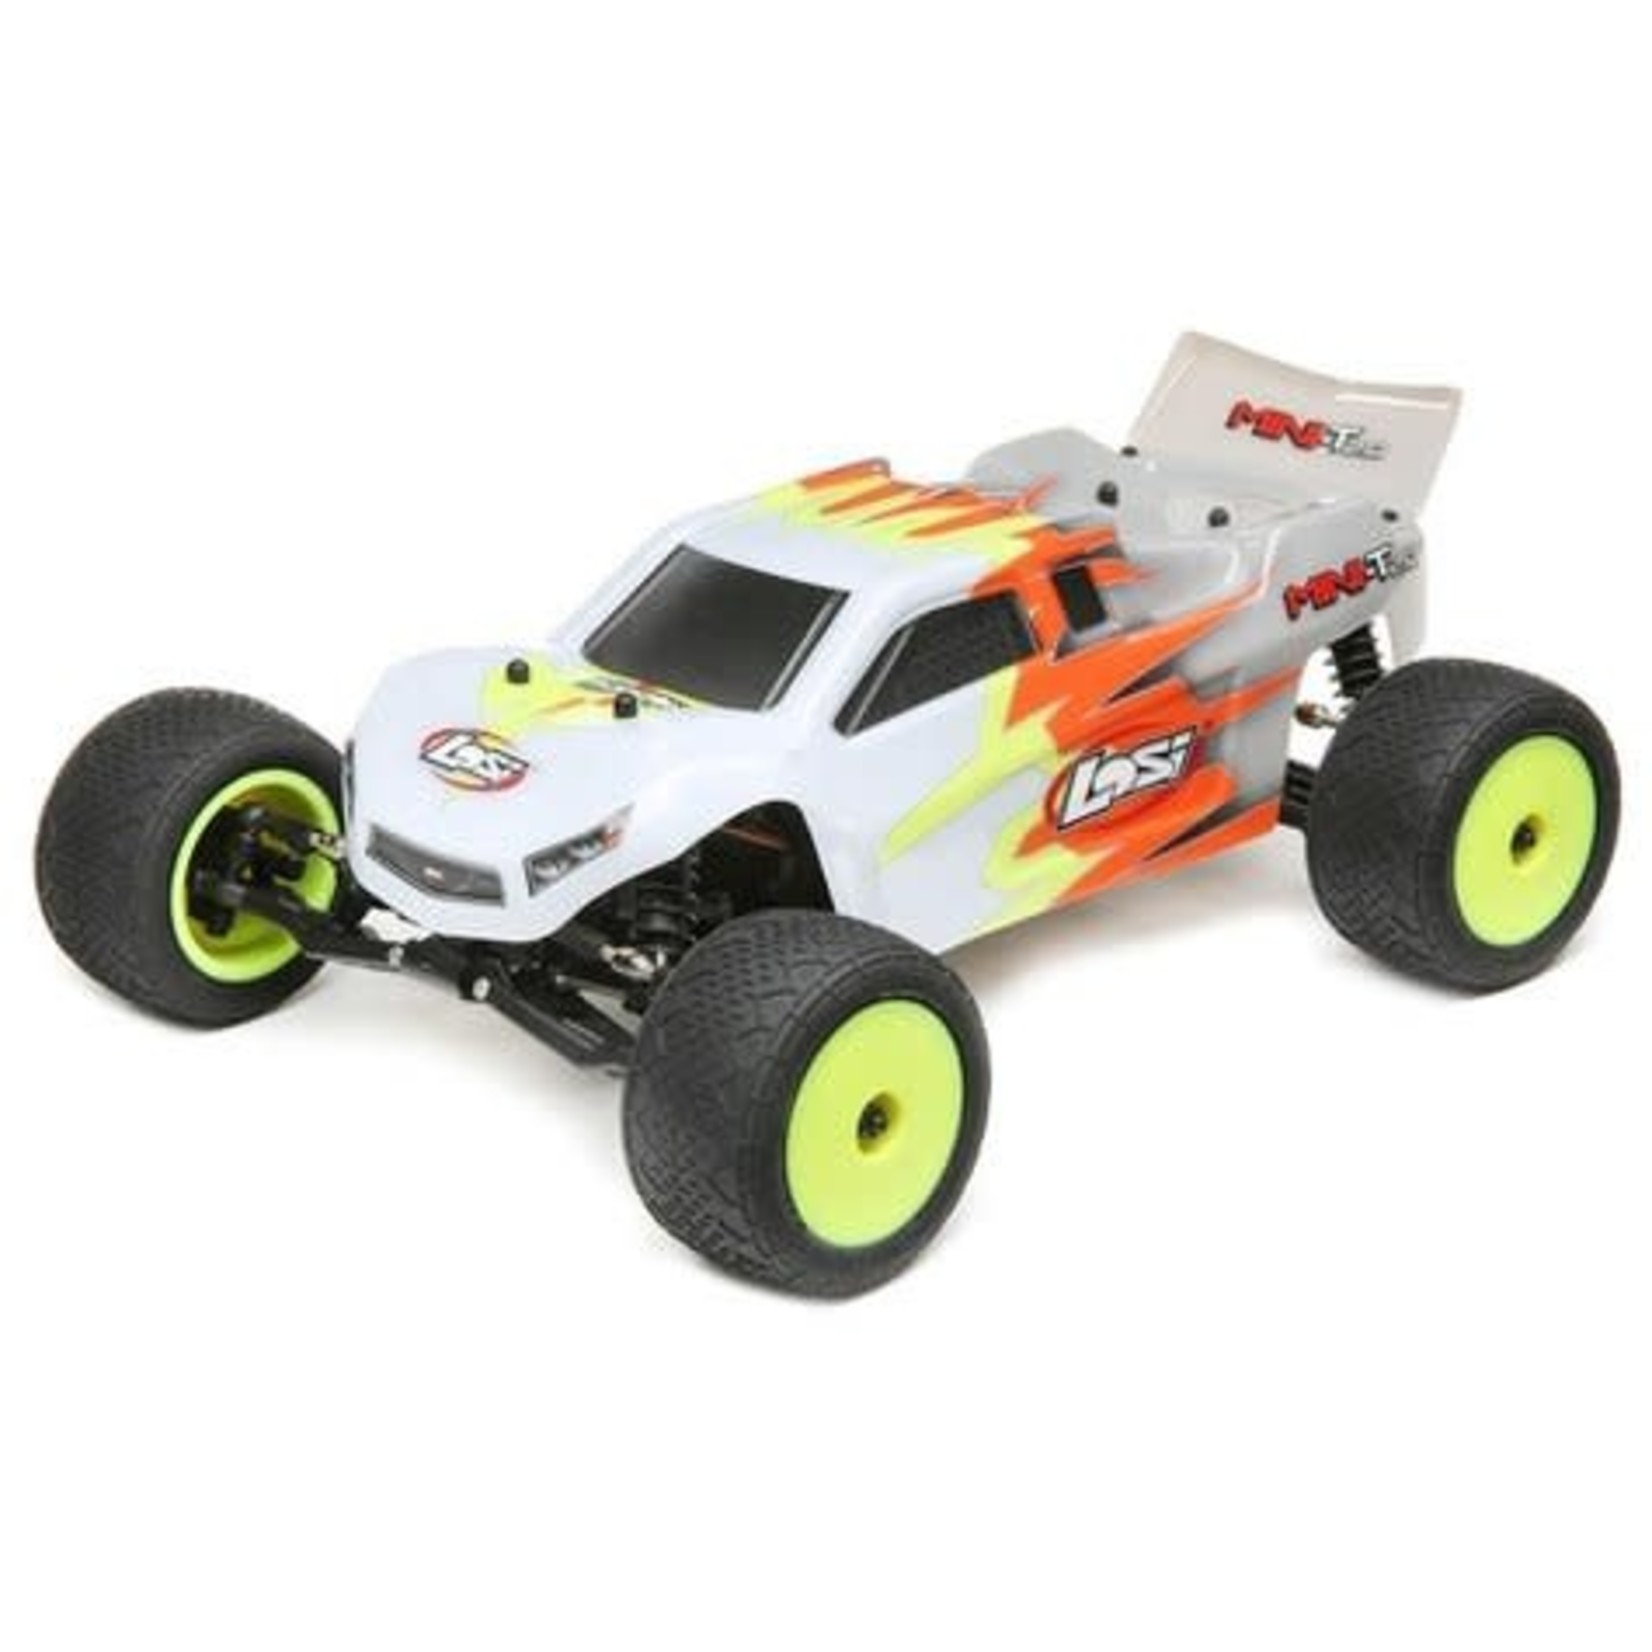 Losi Losi Mini-T 2.0 1/18 RTR 2WD Stadium Truck (Grey/White) w/2.4GHz Radio, Battery & Charger #LOS01015T3